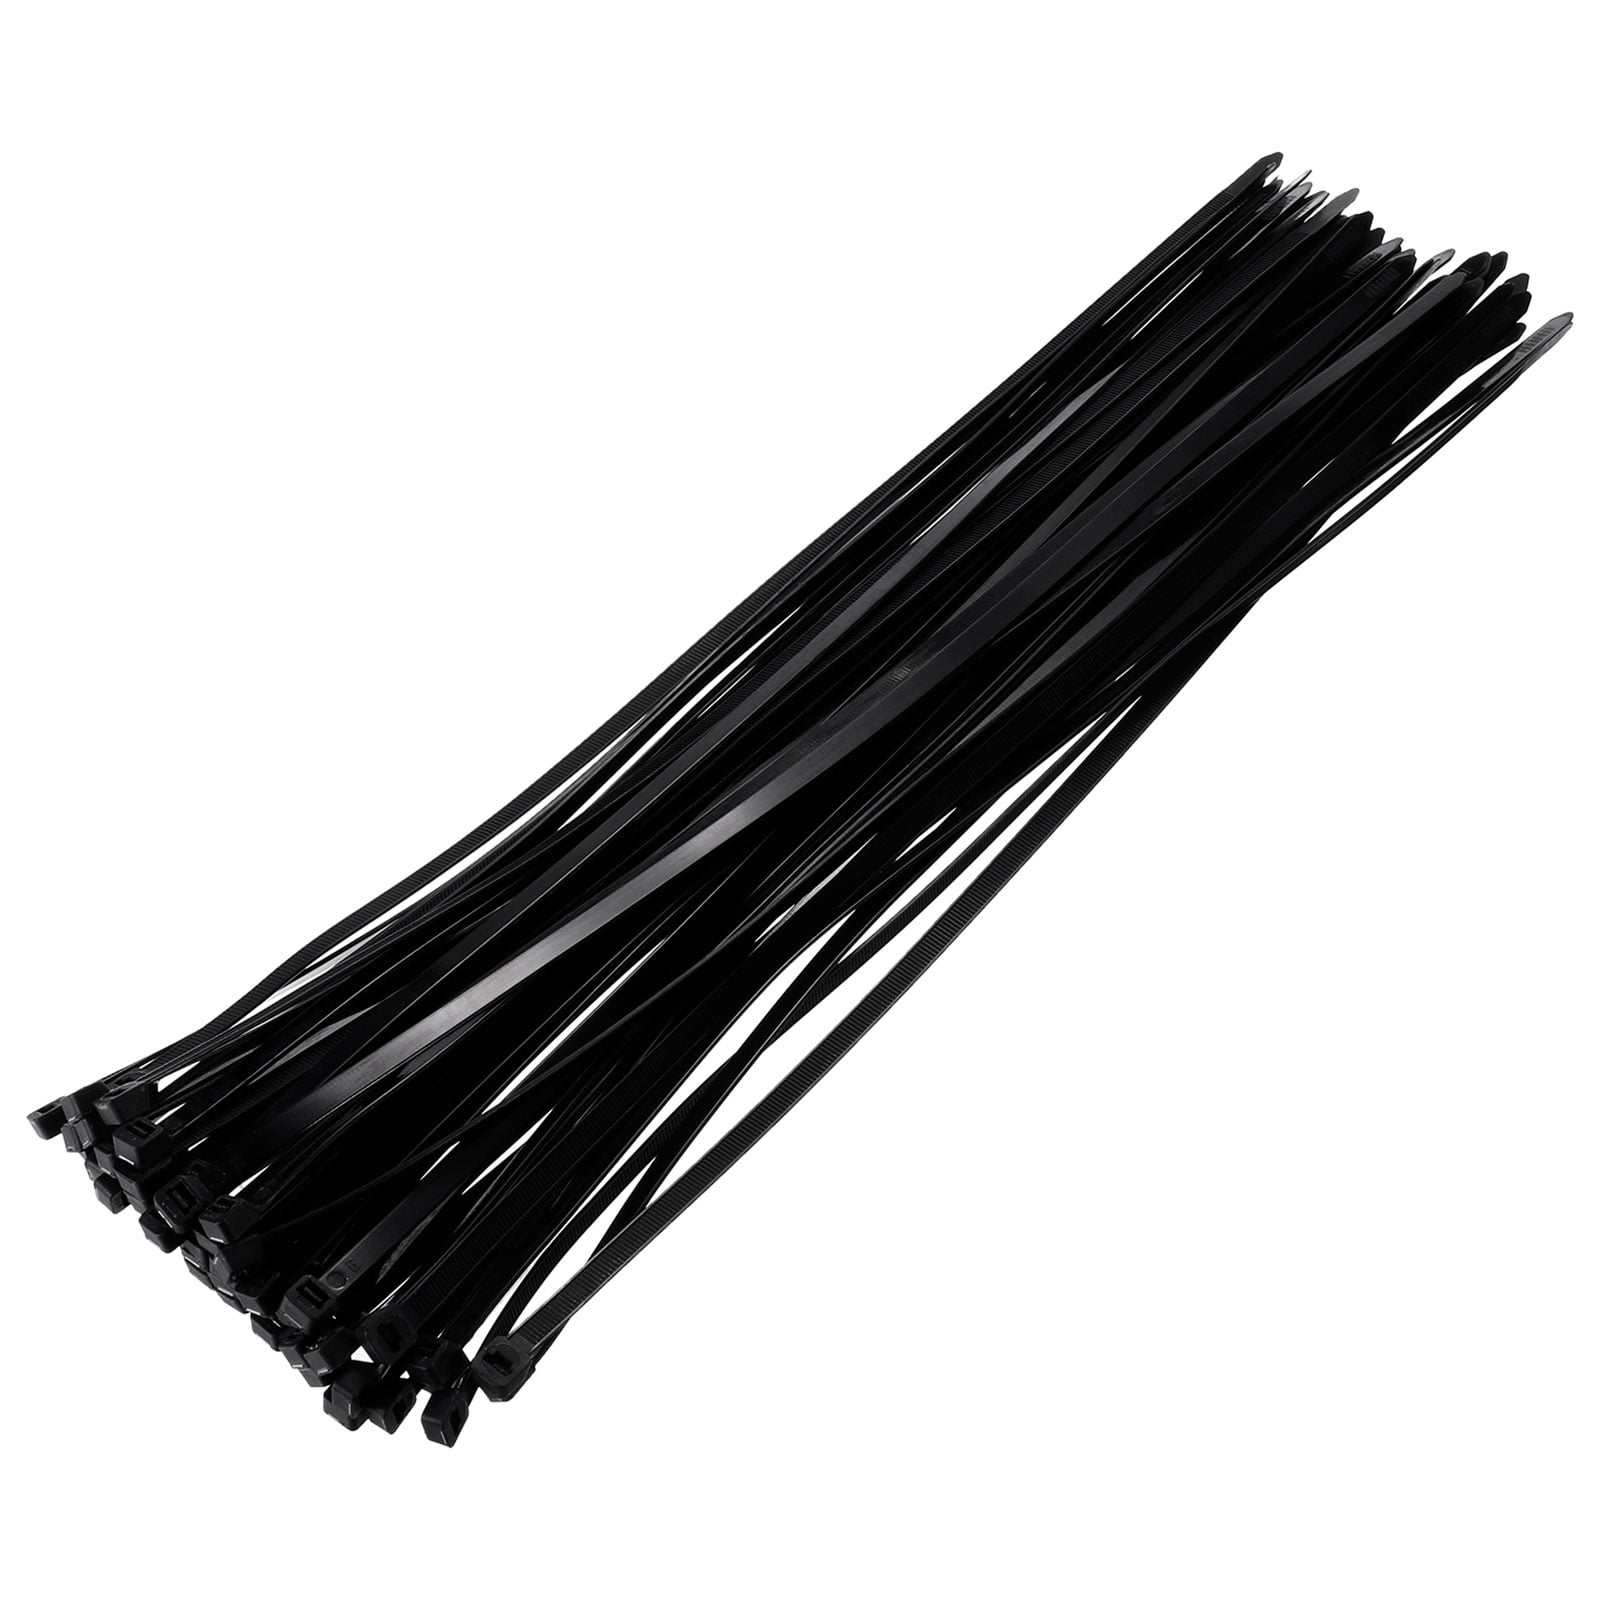 CABLE TIES 300 X 4.8 BLACK NT 0300-48-BK – LECOL ONLINE SHOPPING